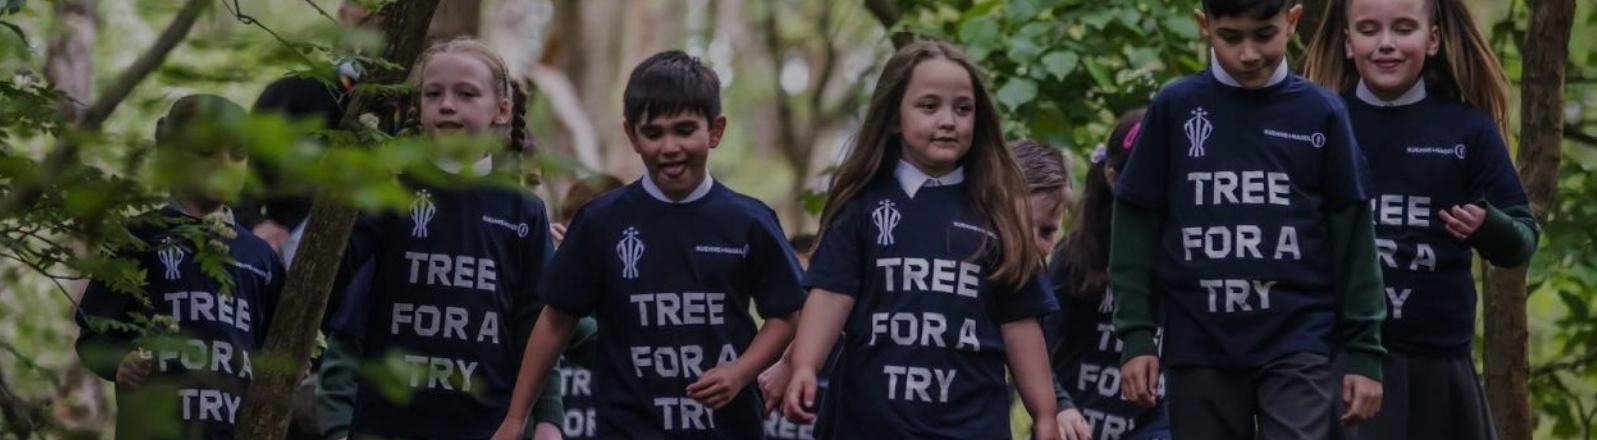 A tree will be planted for every try scored in all competitions at the Rugby League World Cup 2021 to be played in England from October 23 to November 27 ©RLWC 2021